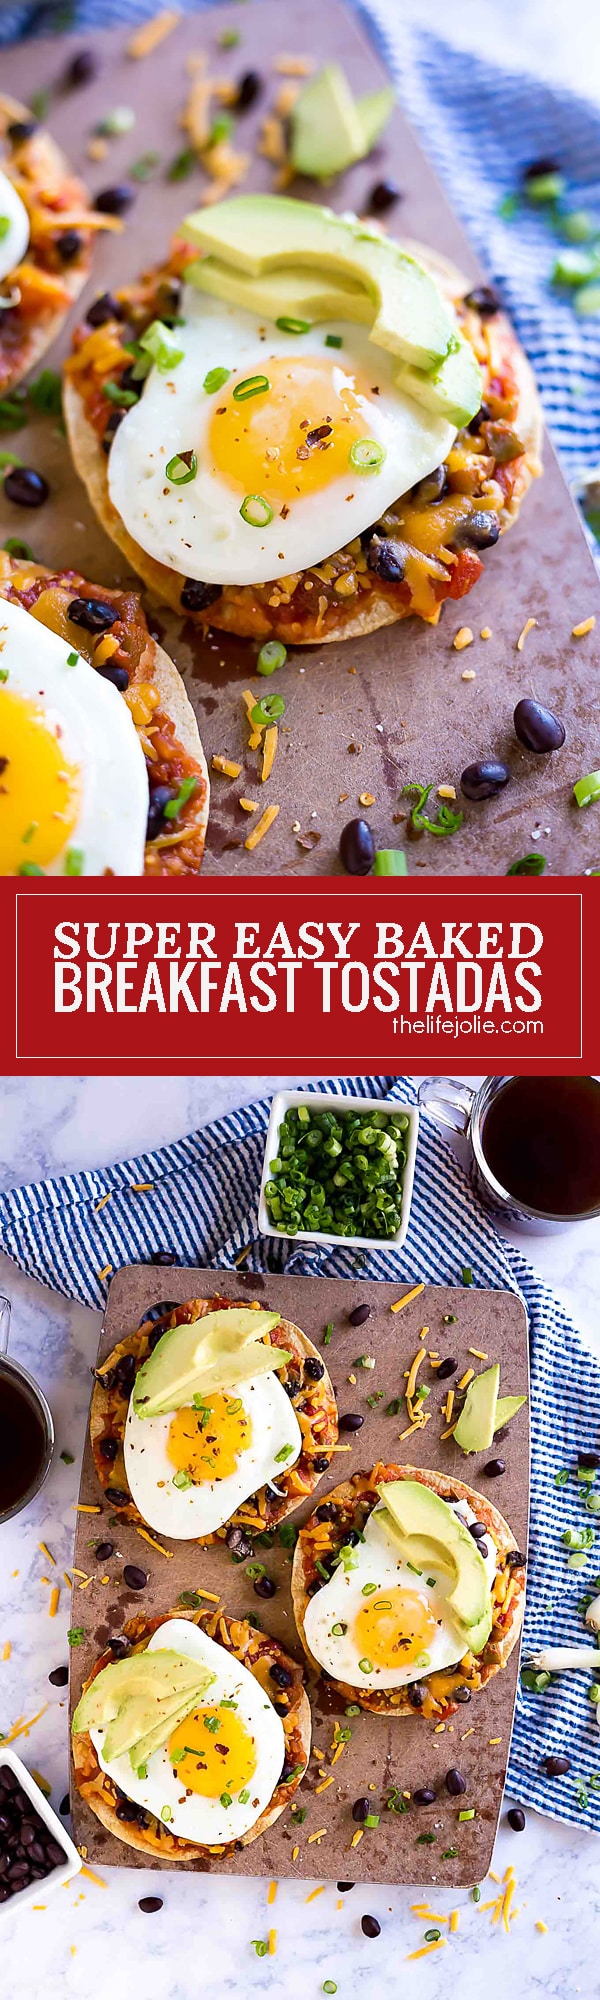 Baked Breakfast Tostadas are one of my favorite easy recipes to make for breakfast (or lunch- or brunch!). This is simple cooking at it's finest with corn tortillas, salsa, black beans, cheese and eggs. You can get creative and take it in whatever direction you'd like- this quick and delicious dish is definitely a keeper!